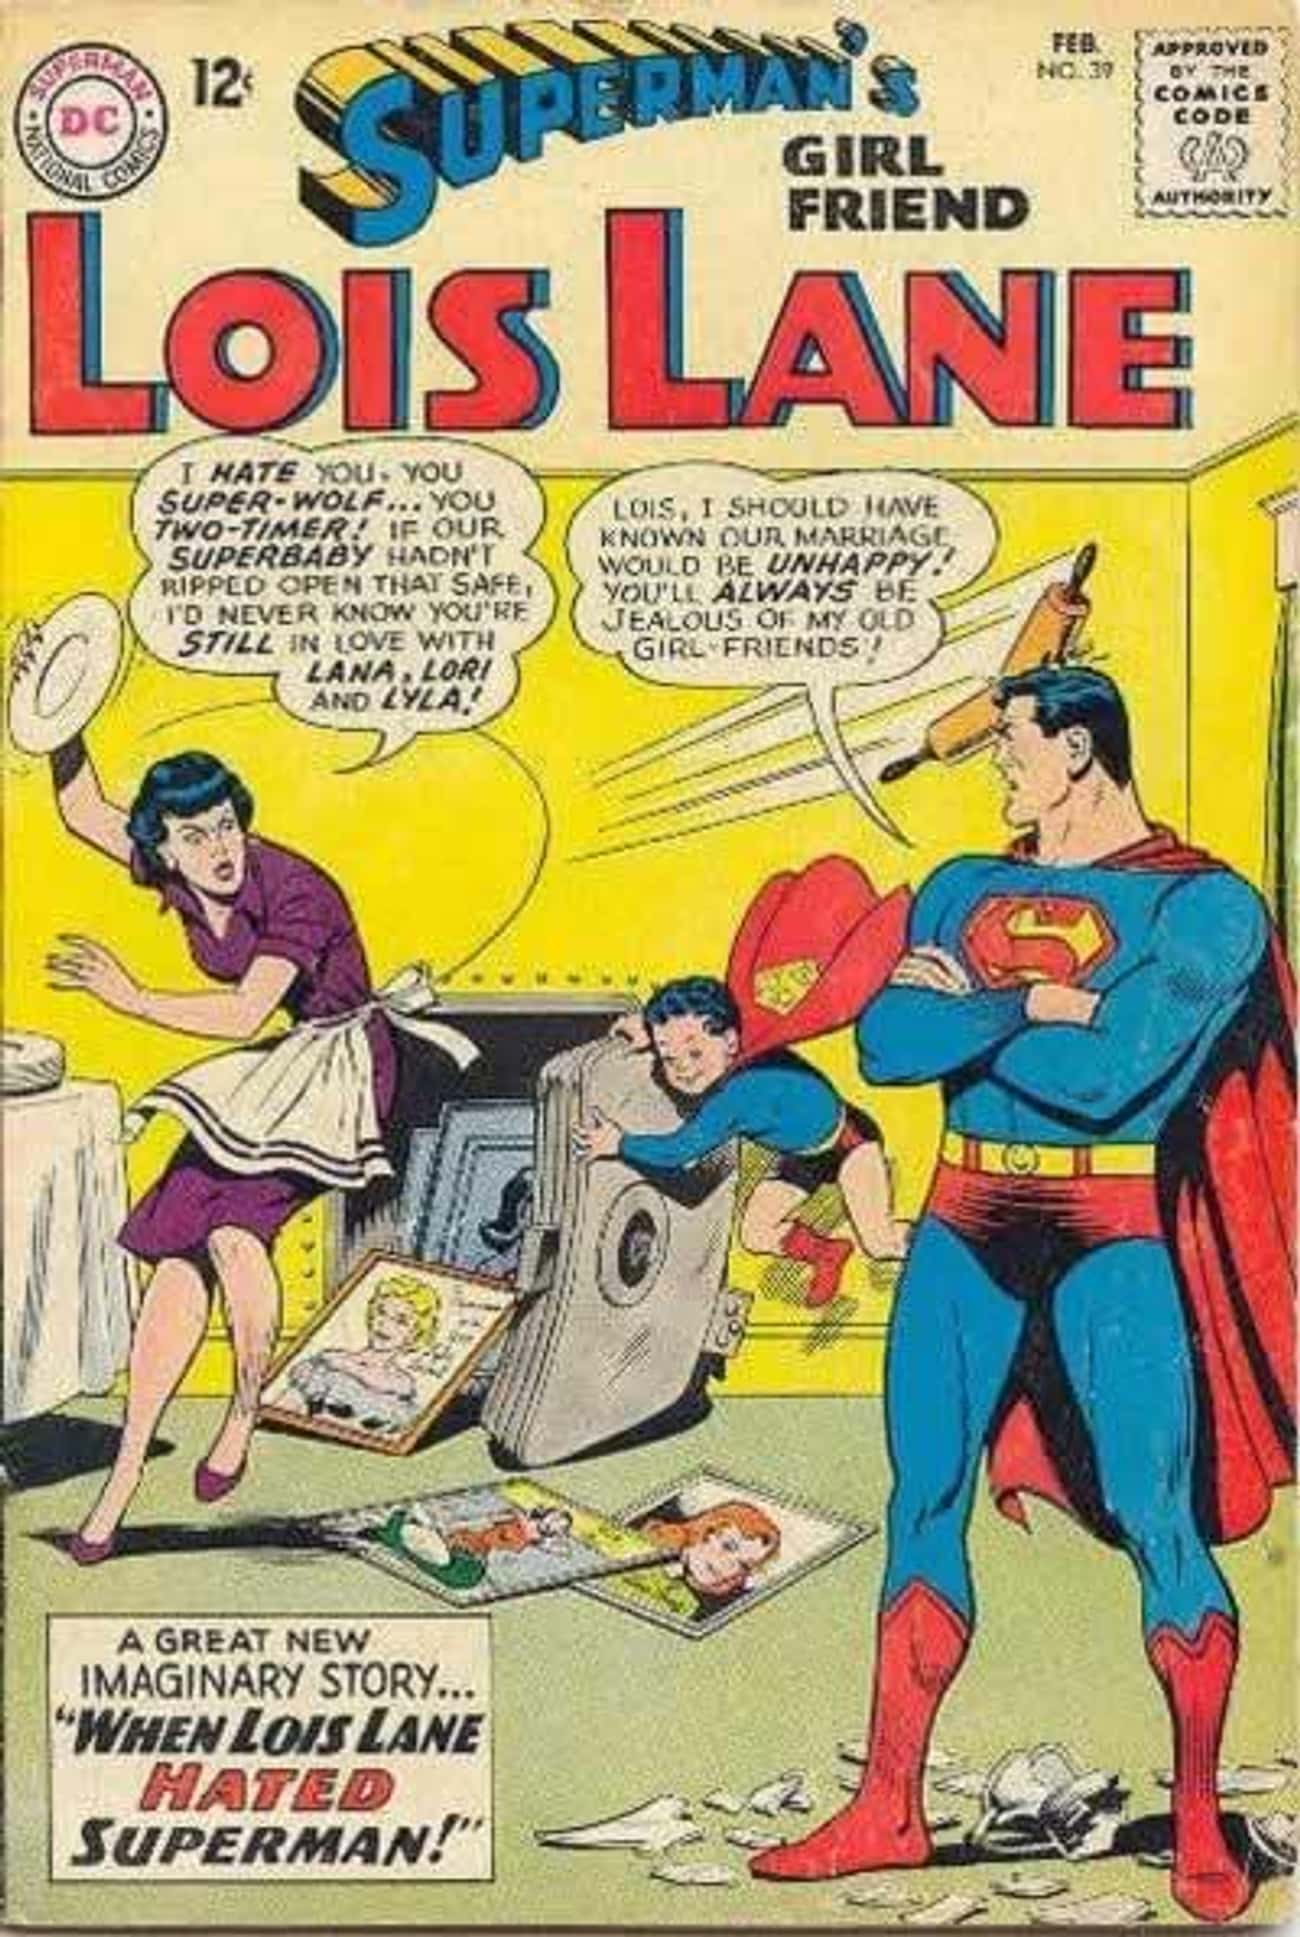 the-one-where-cheating-is-no-big-deal-to-superman-comic-book-series-photo-u1